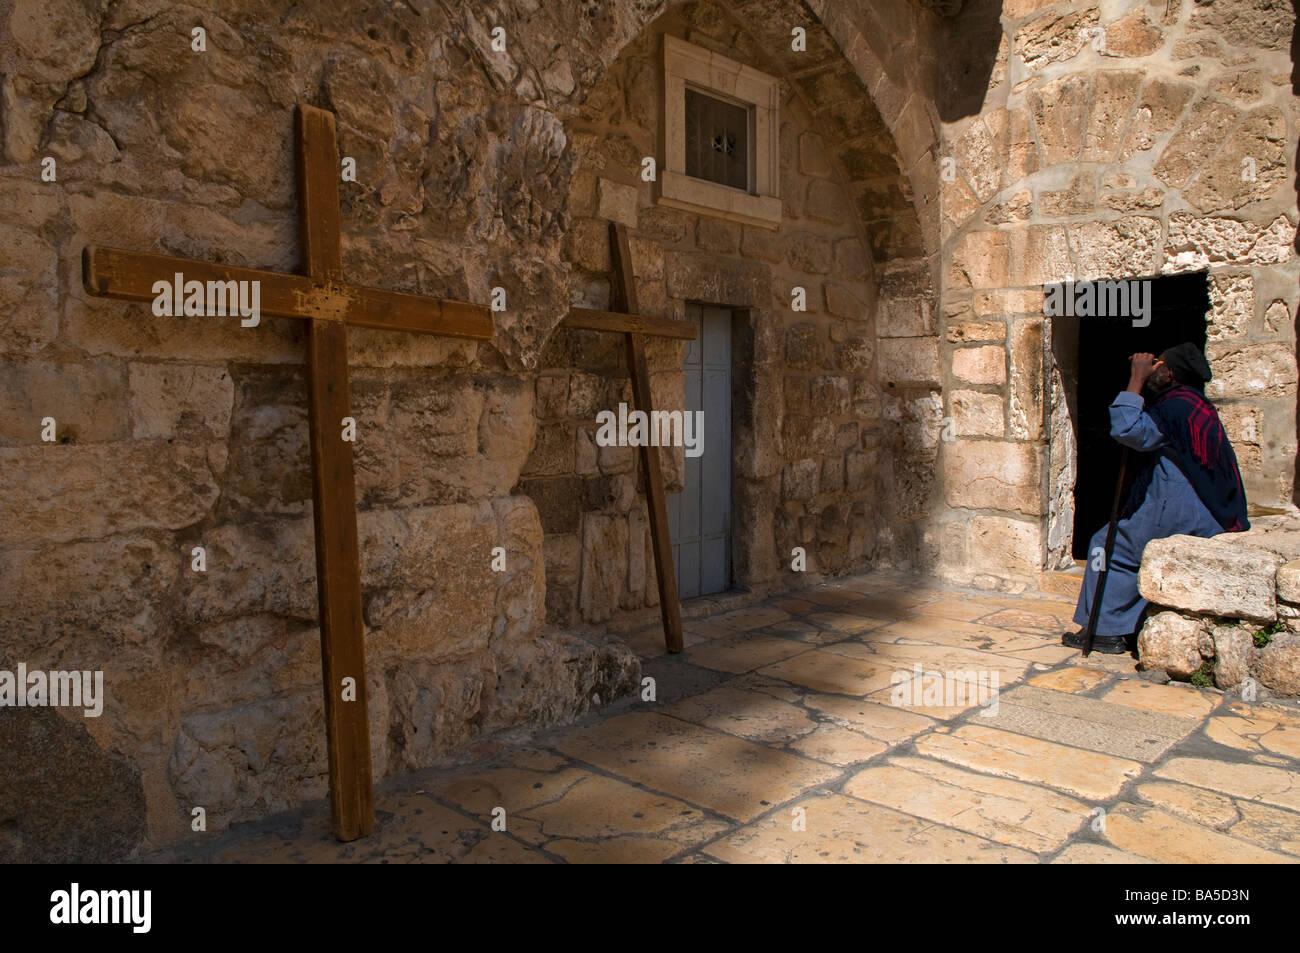 Ethiopian orthodox monk at entrance to the Ethiopian orthodox chamber at the Church of Holy Sepulchre in the Christian Quarter old city East Jerusalem Stock Photo